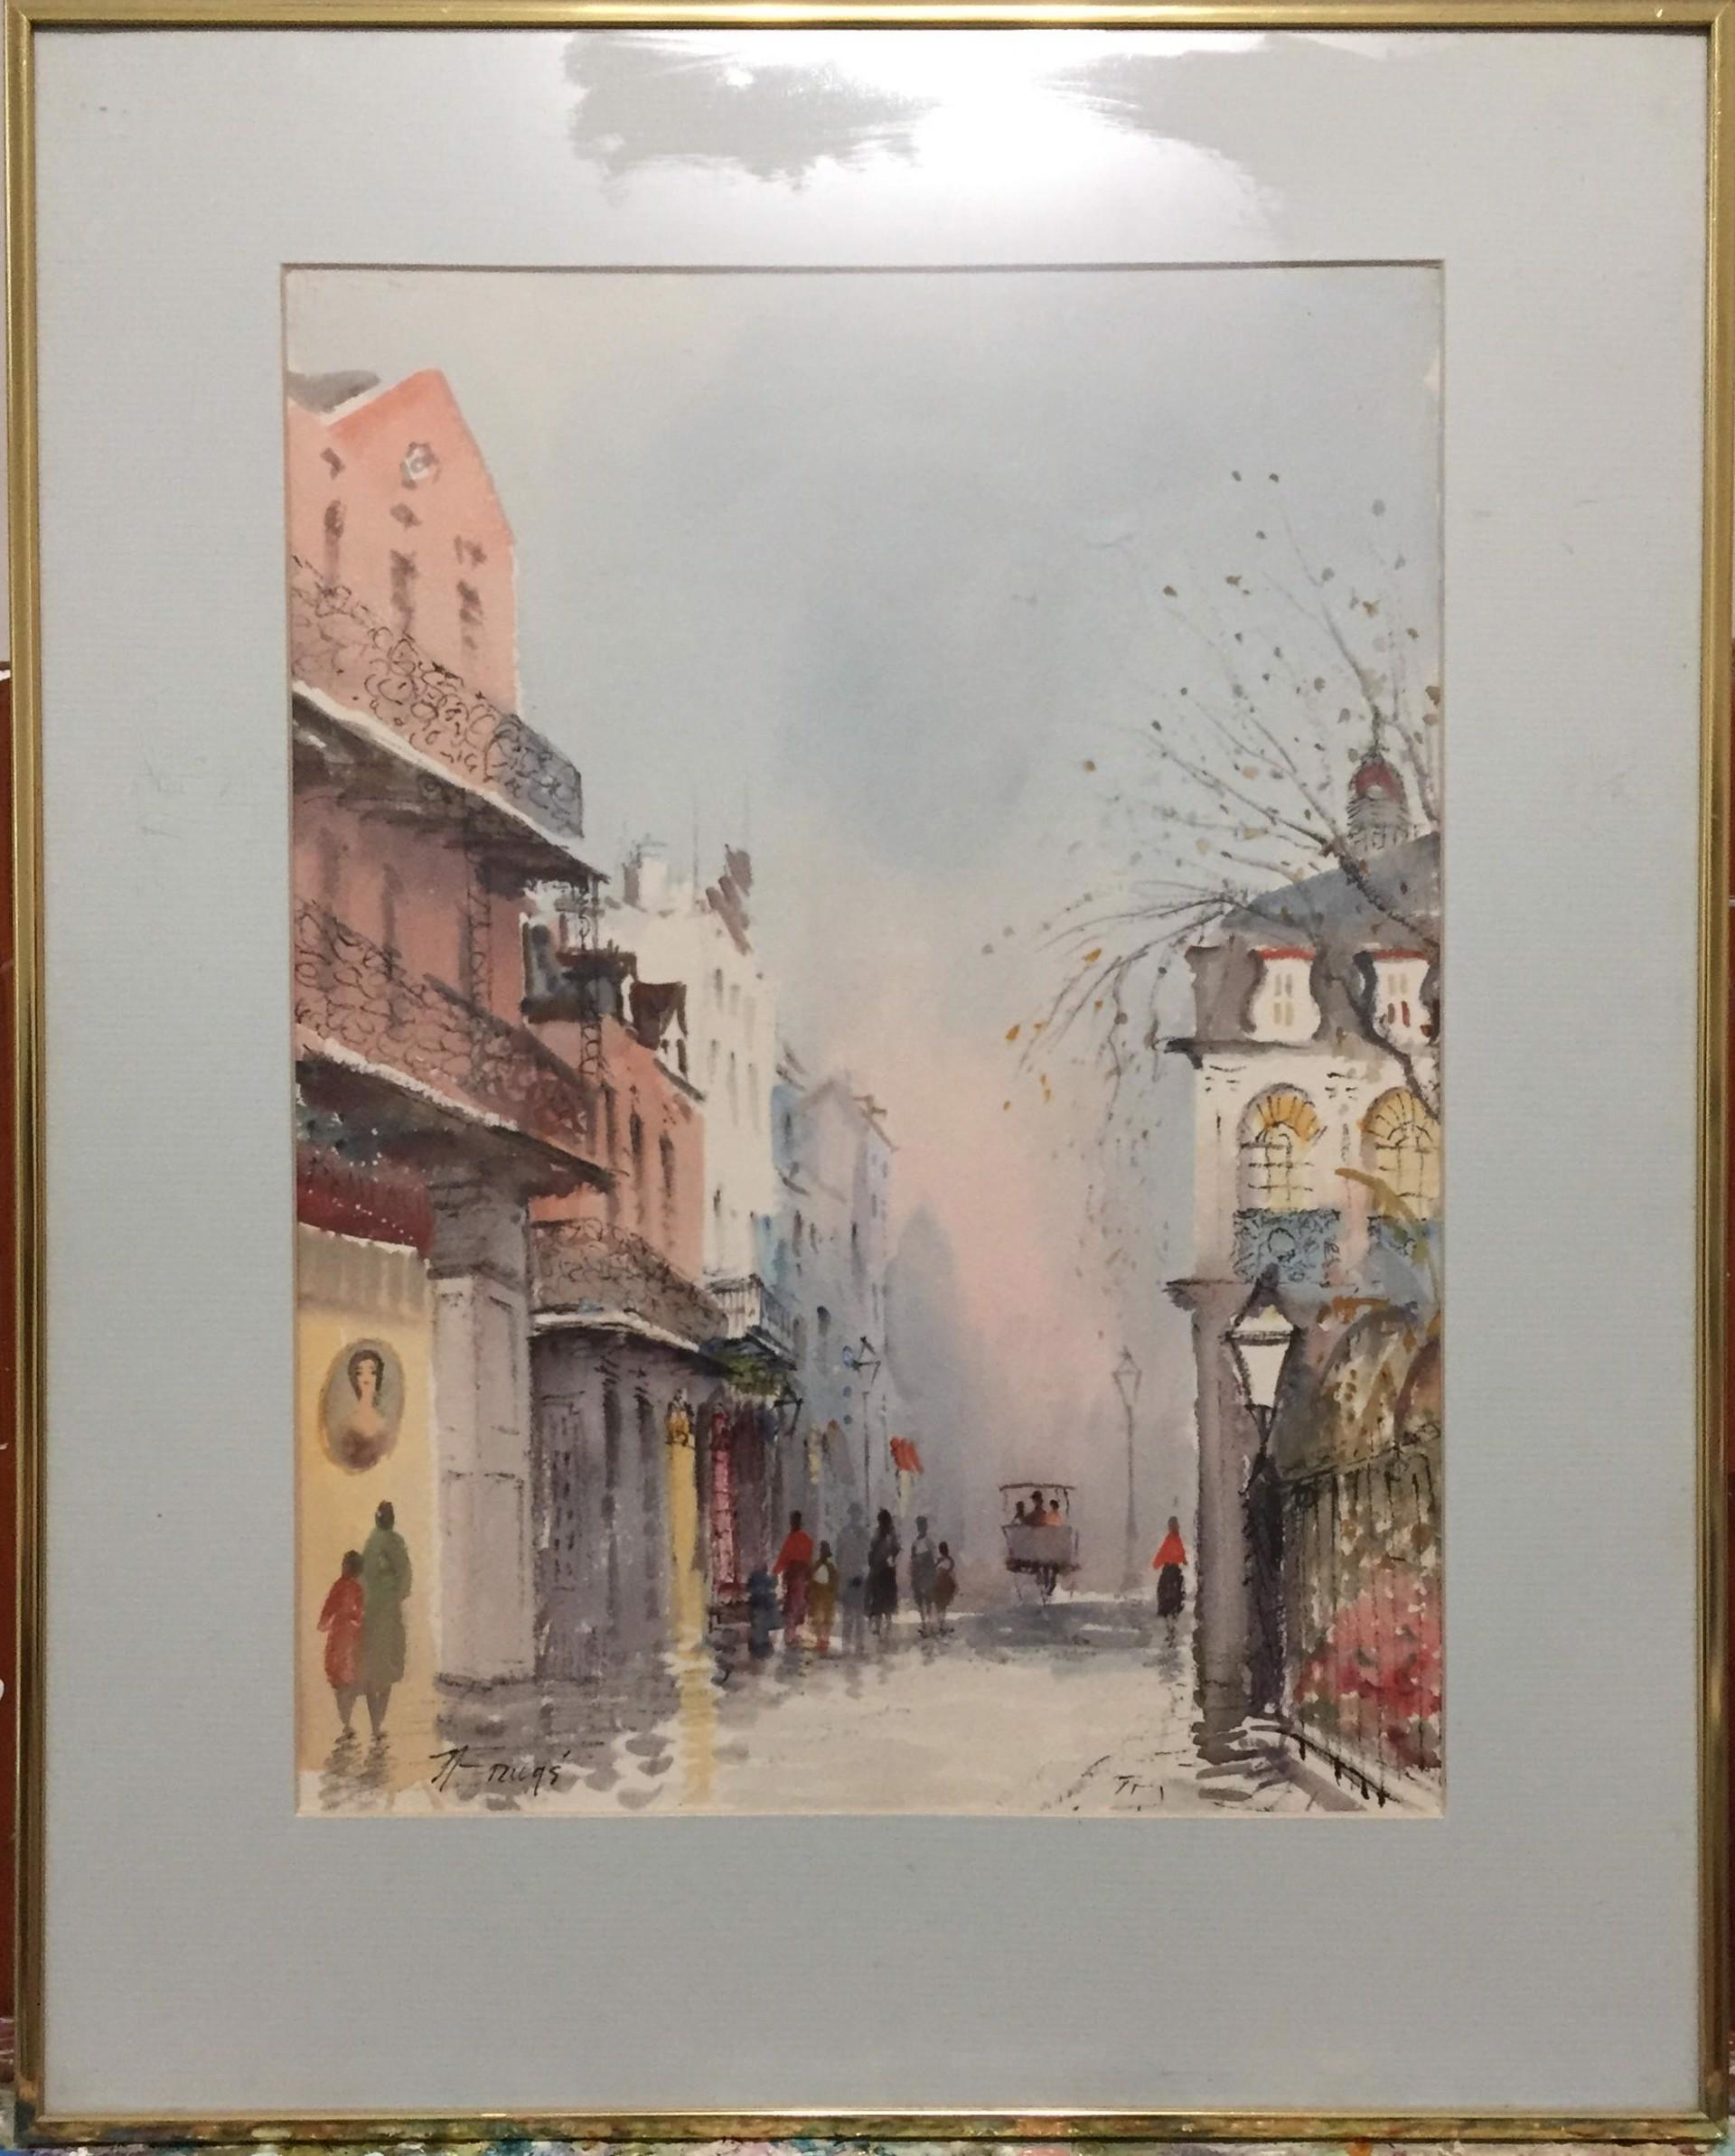 French Quarter Scene (Mid-Century Framed New Orleans Watercolor Painting) - Art by Nestor Fruge